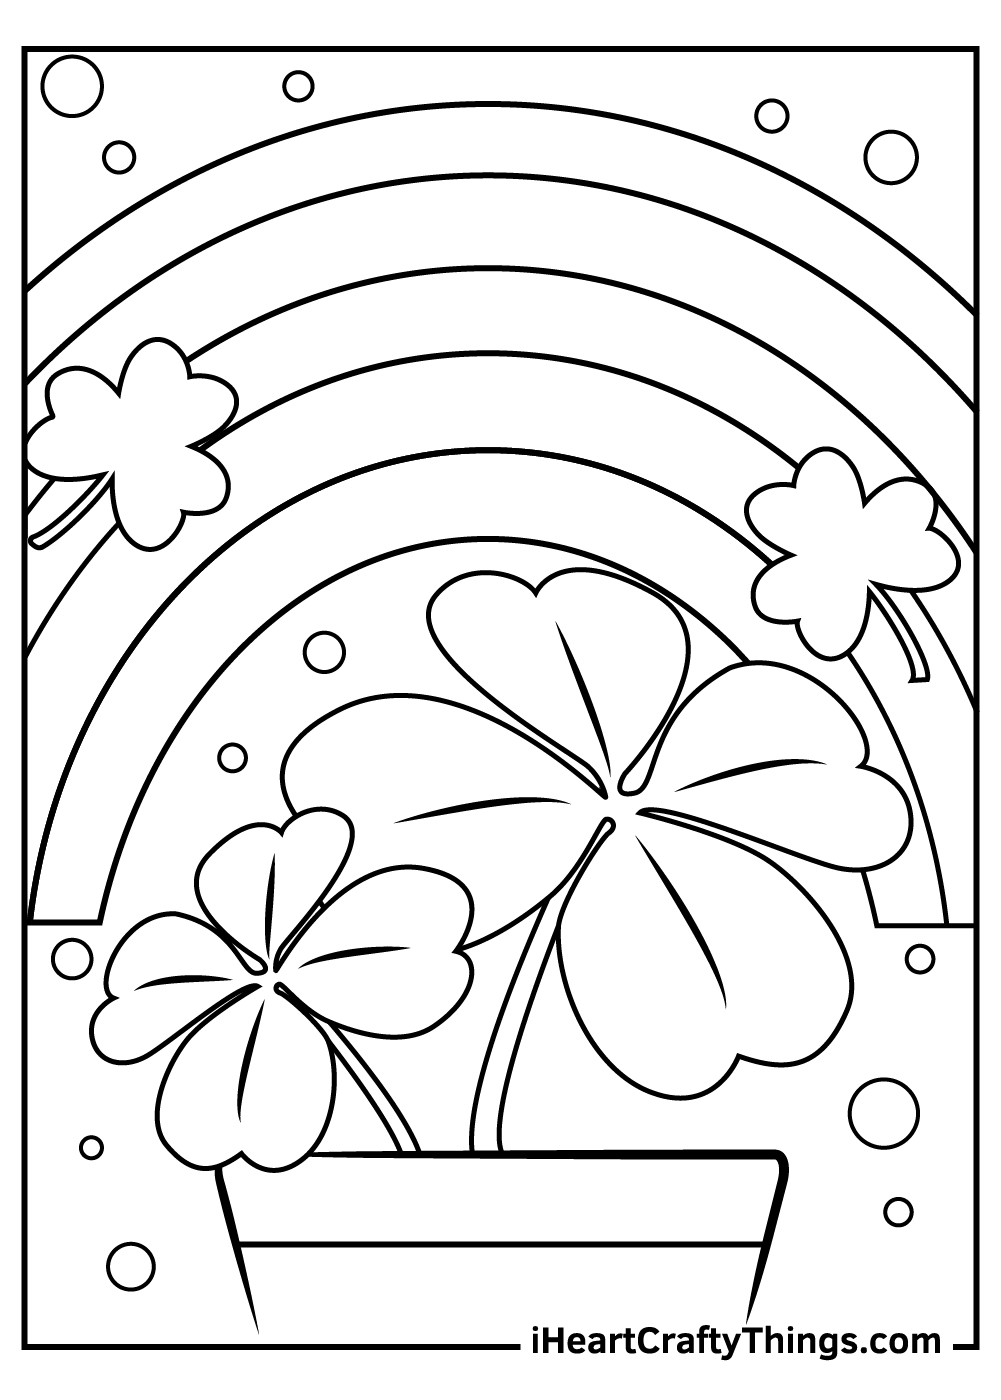 Shamrock Coloring Pages Updated 20